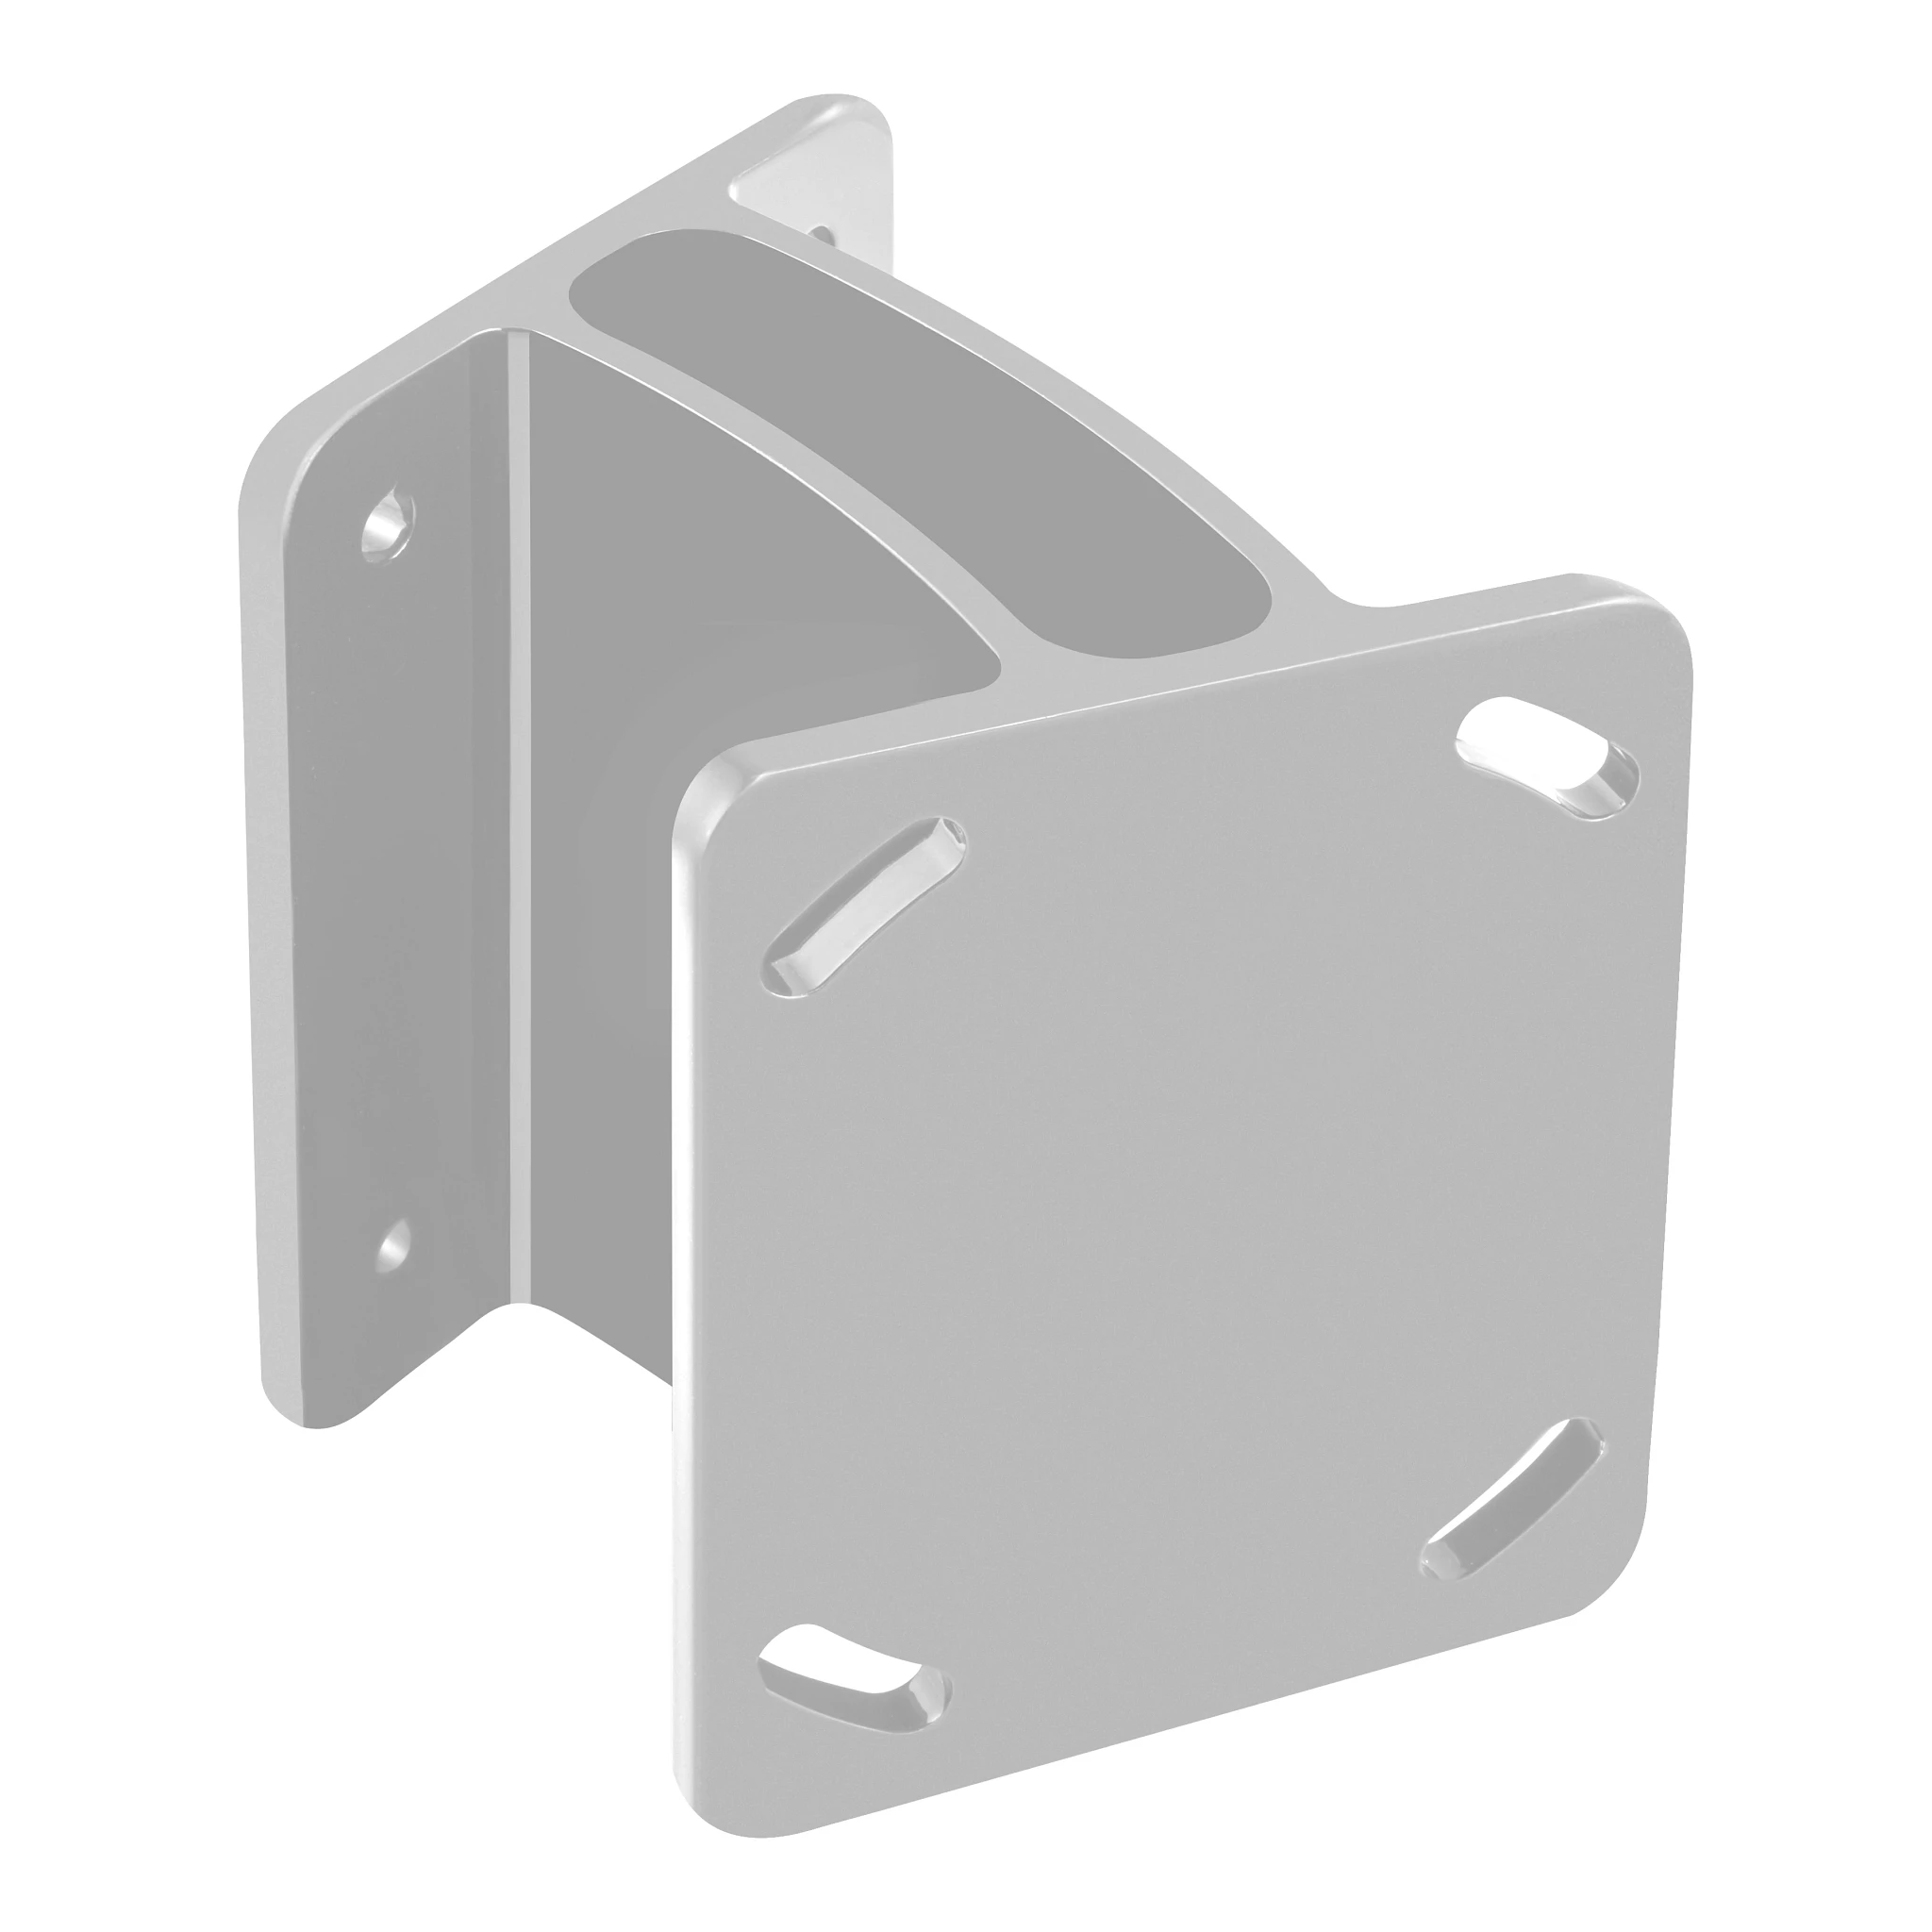 White, direct mount angle bracket for Raptor shallow water anchor